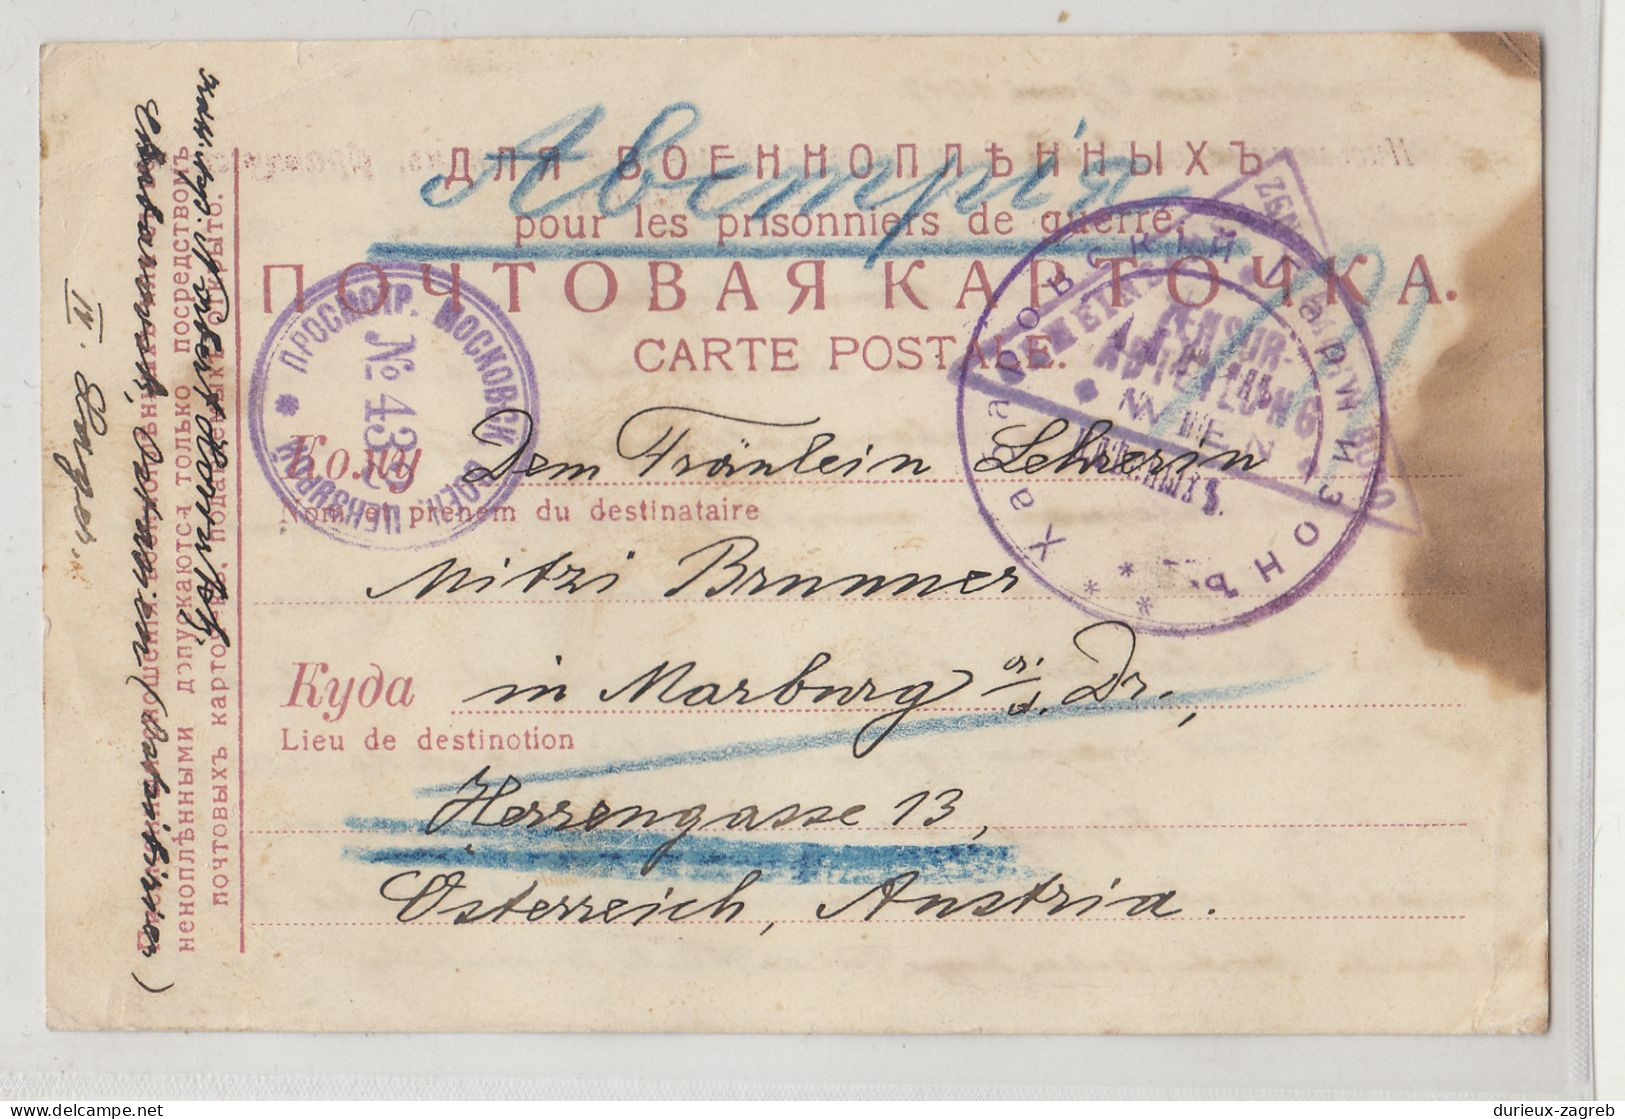 Russia WWI POW Postcard Posted 1917 Habarovsk To Marburg A.D. B240510 - Stamped Stationery